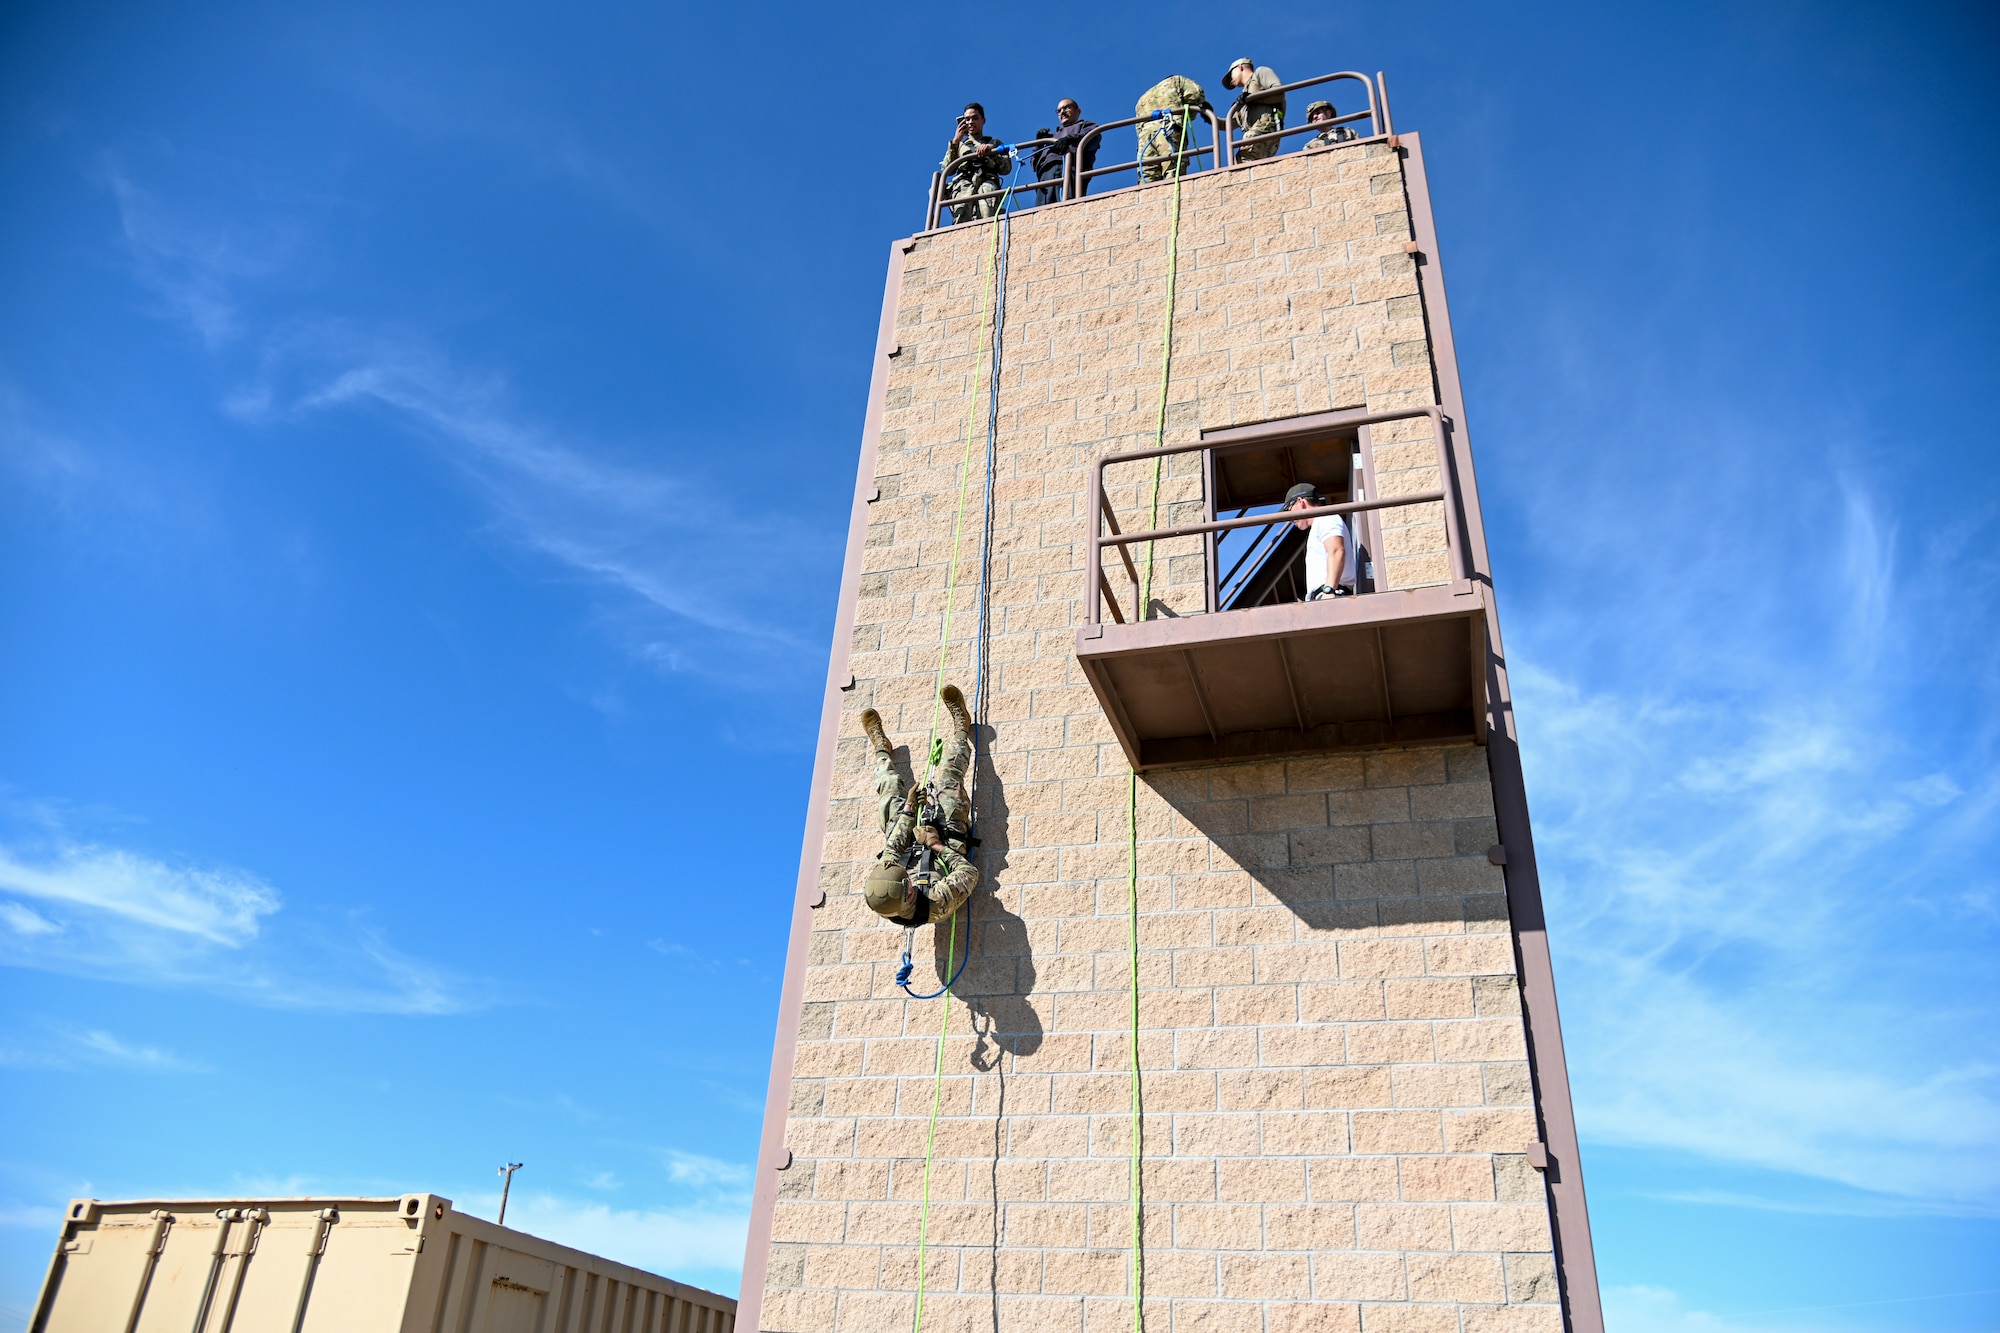 Members from the 49th Security Force Squadron and 49th Civil Engineer Squadron participate in the 49th Wing’s first rappel skills training, Oct. 5, 20201, on Holloman Air Force Base, New Mexico. The rappel training provides an additional skill set for 49th Wing first responders. (U.S. Air Force photo by Airman 1st Class Jessica Sanchez-Chen)